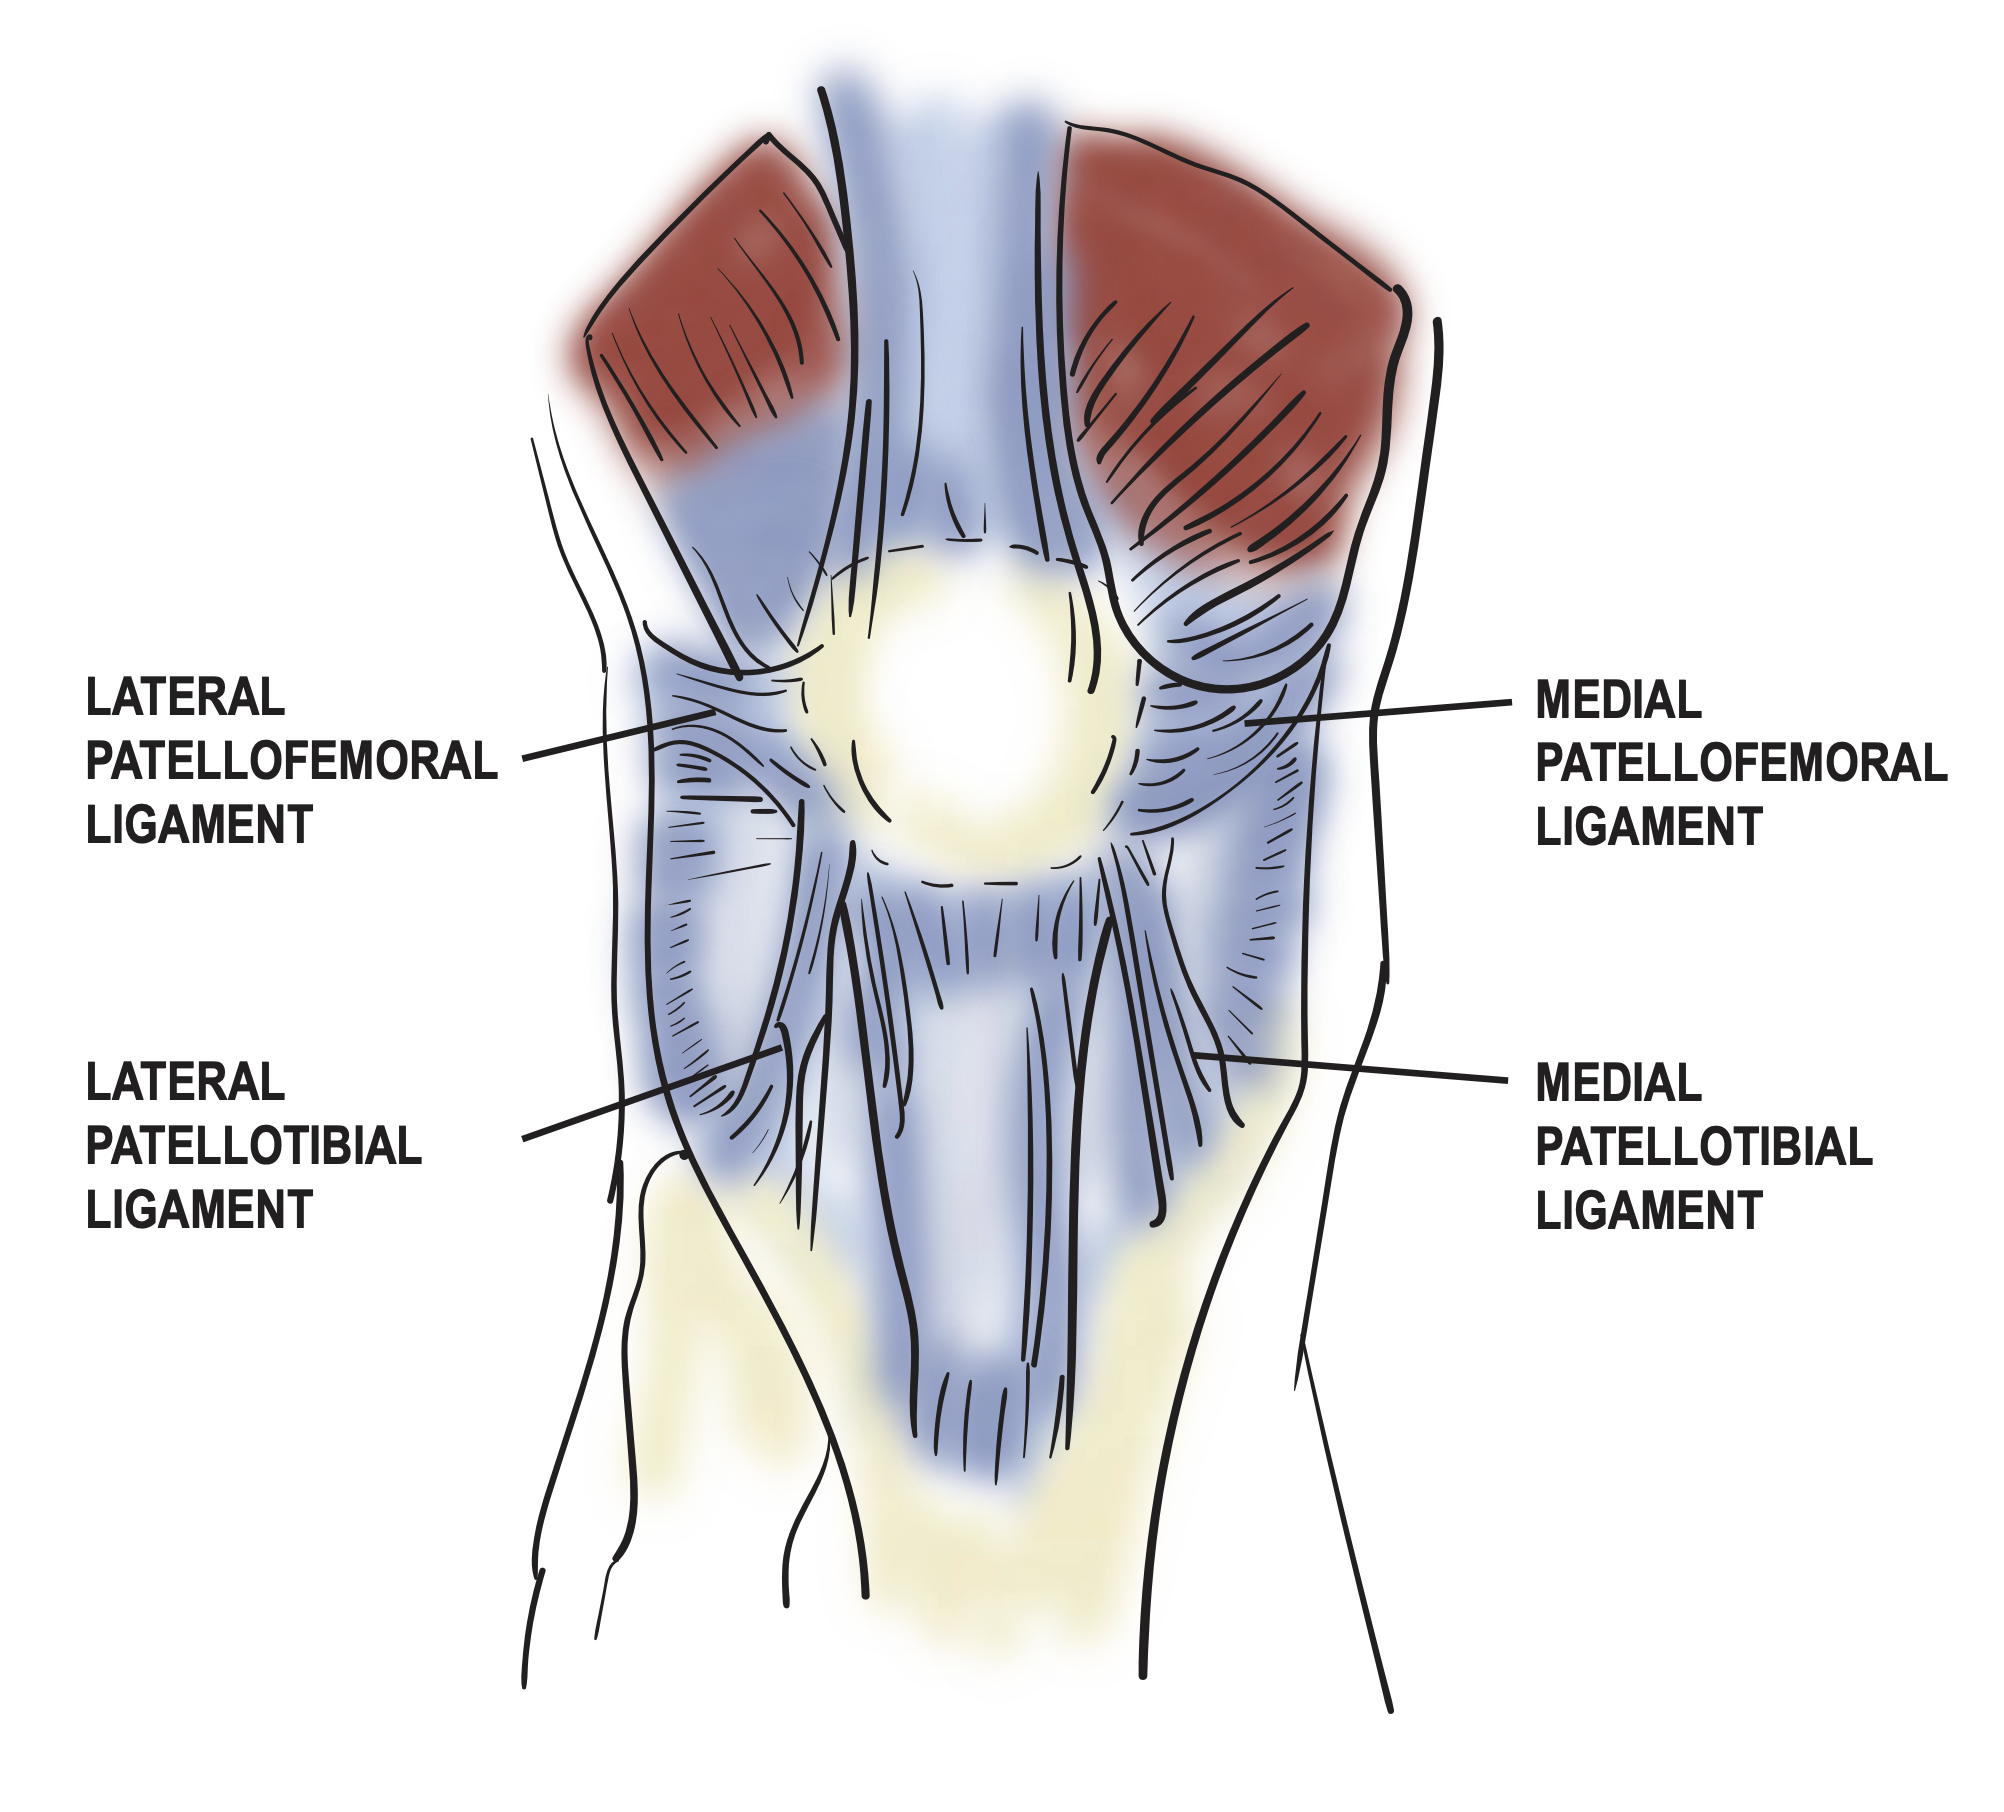 Diagram of the patellofemoral ligaments.